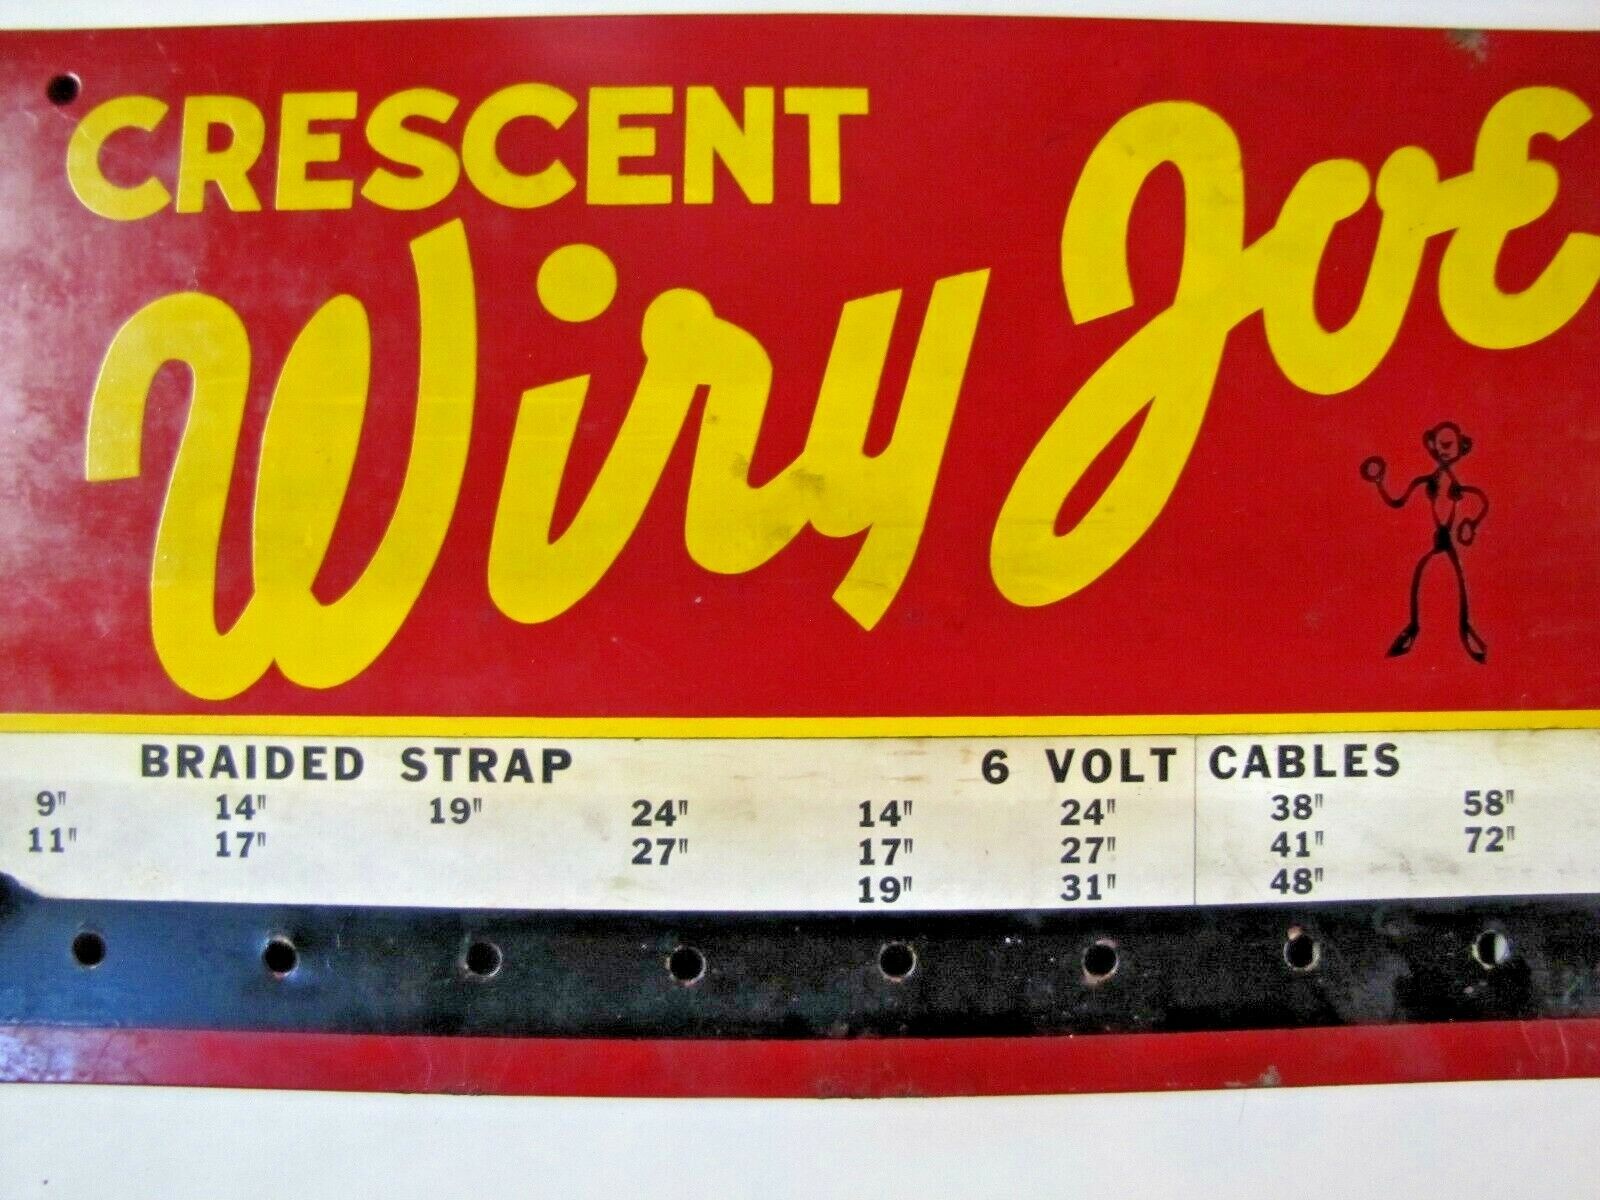 1940-50s CRESCENT WIRY JOE BATTERY CABLE Sign Metal Gas Station Parts Store Shop